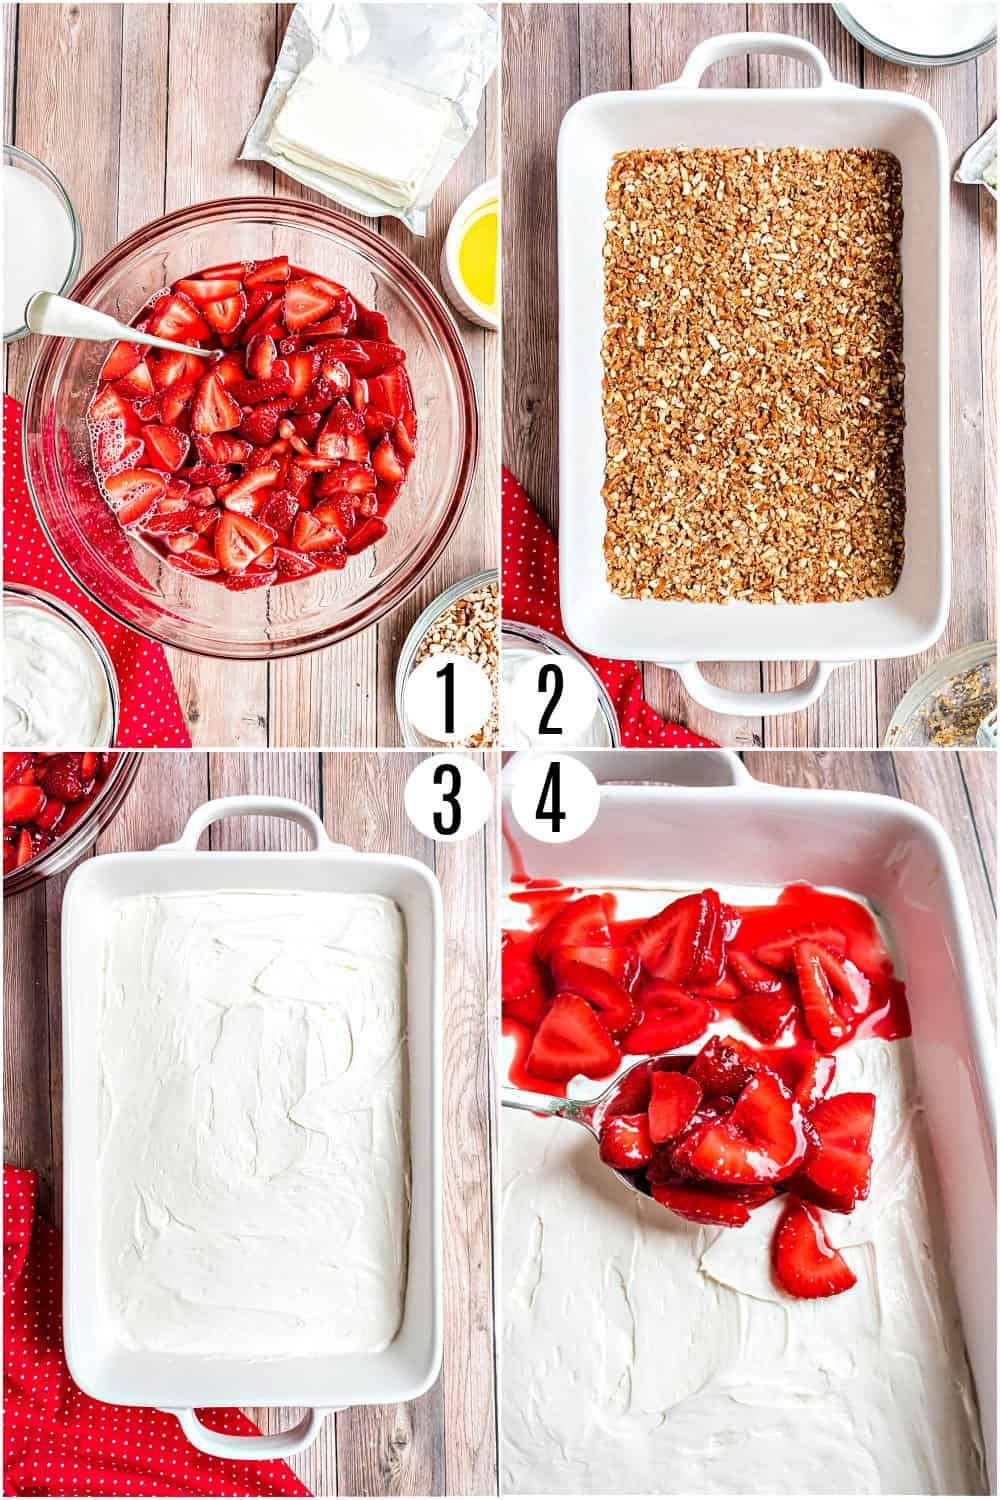 Step by step photos showing how to make strawberry pretzel salad.